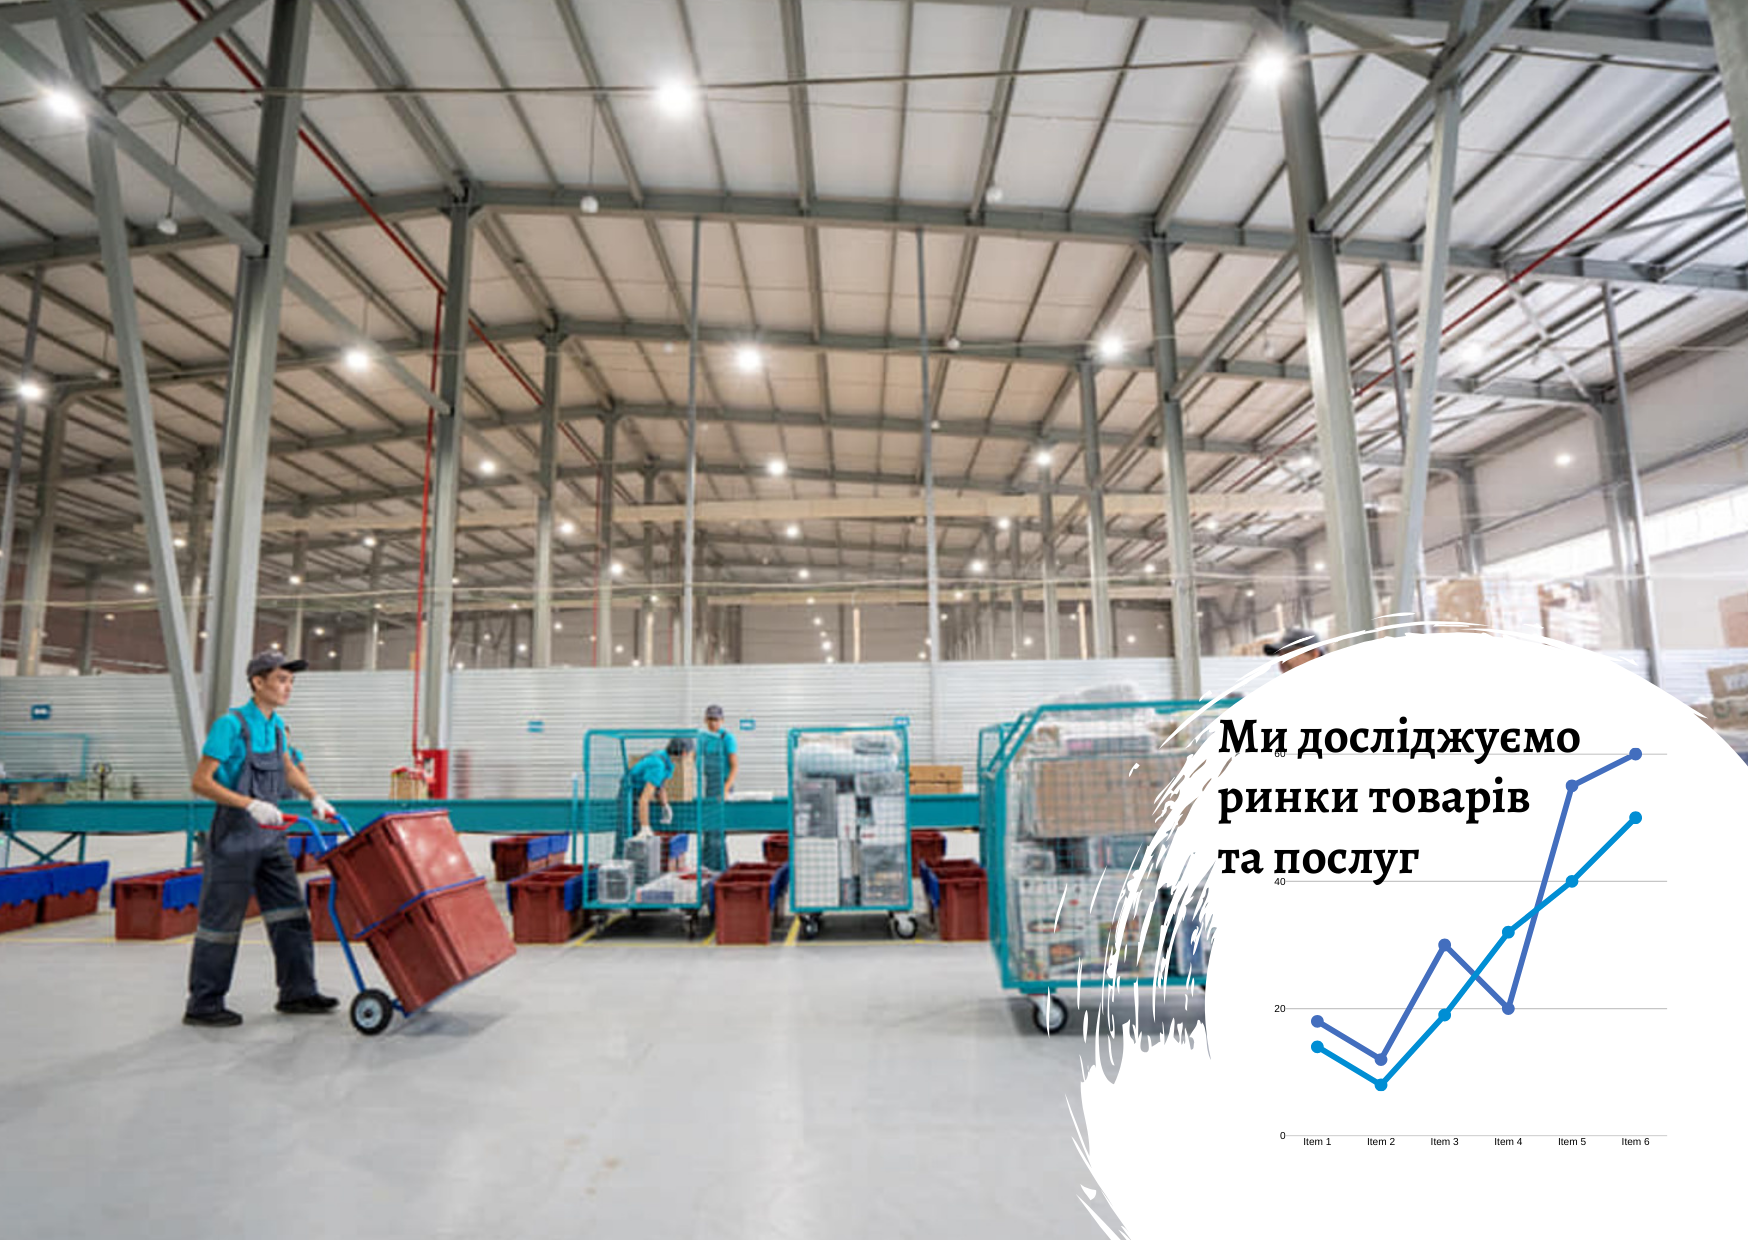 Kyiv warehouse real estate market: trends and the war factor